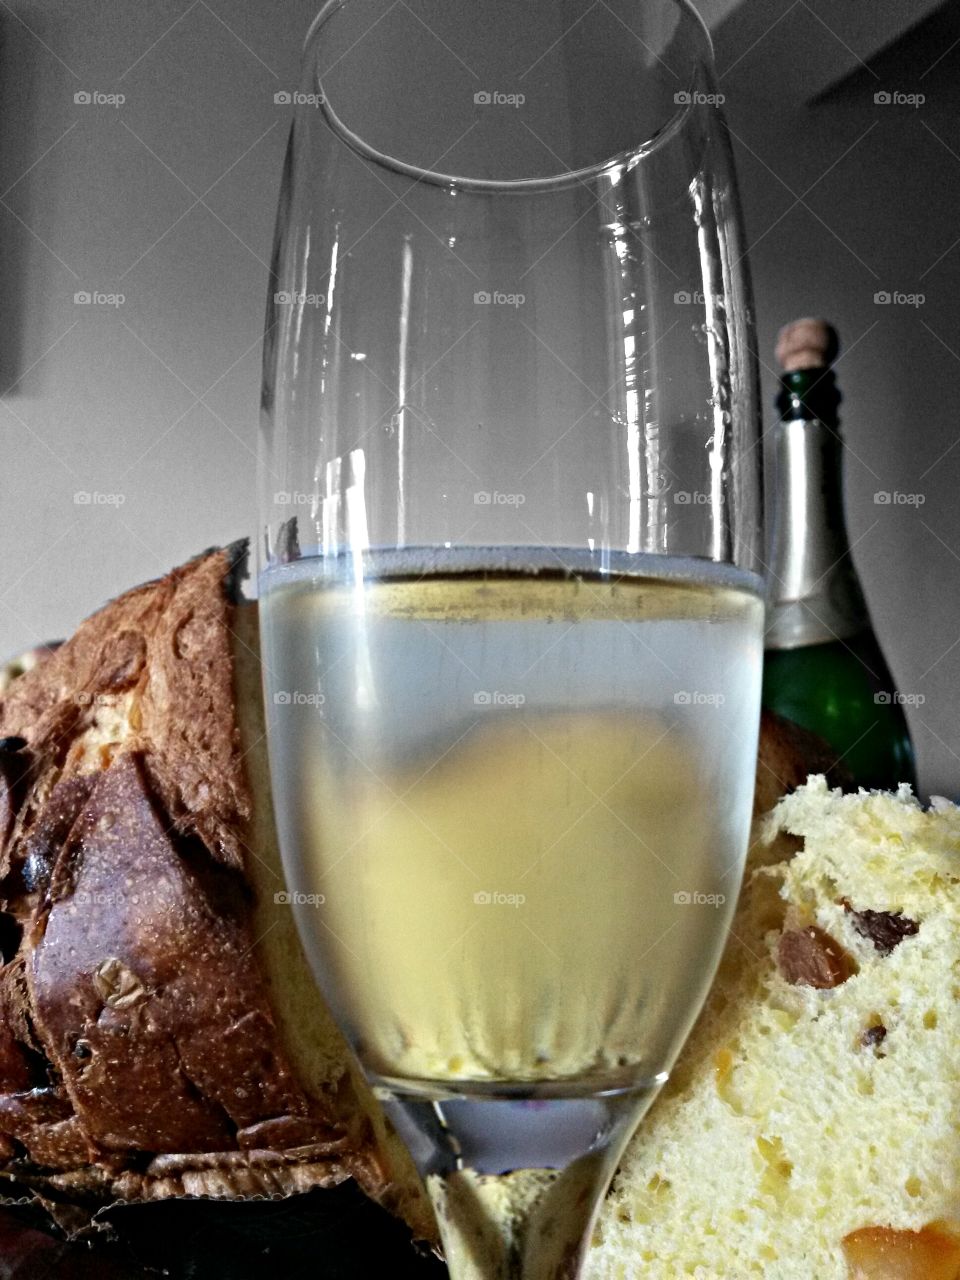 sparkling wine and italian traditional panettone for christmas celebration